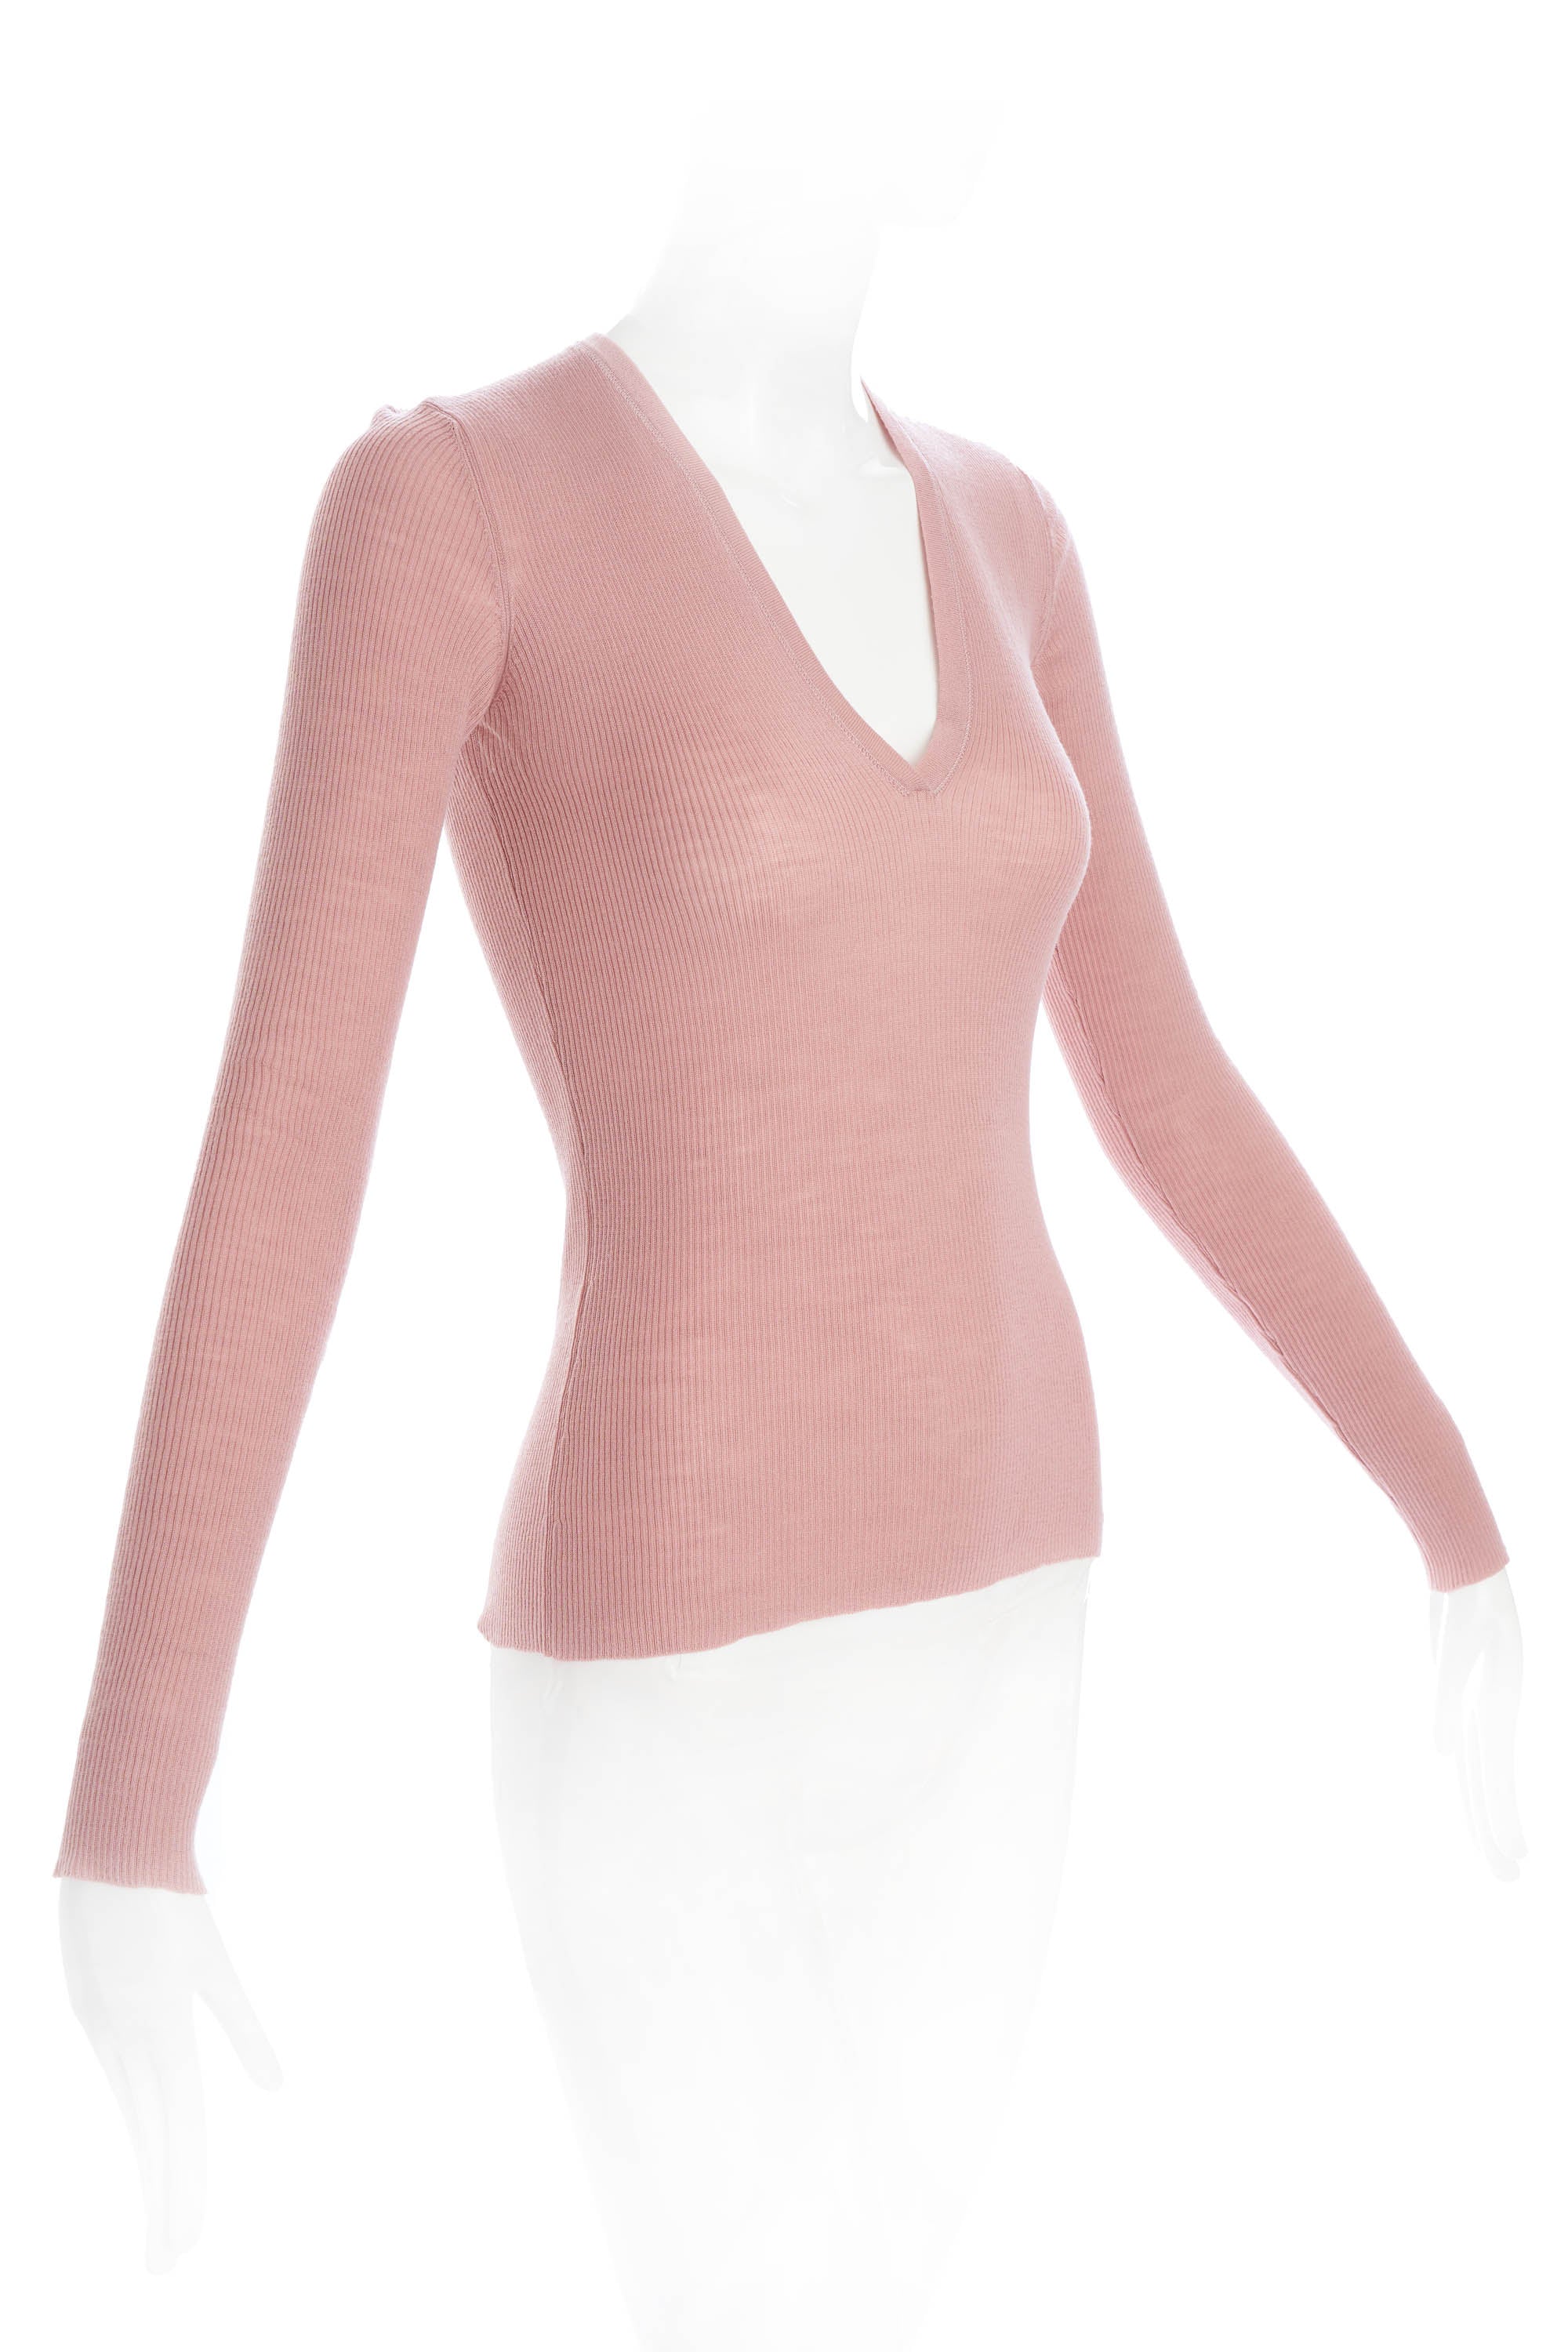 Gucci Dusty Rose Knit Long Sleeve Top Size M